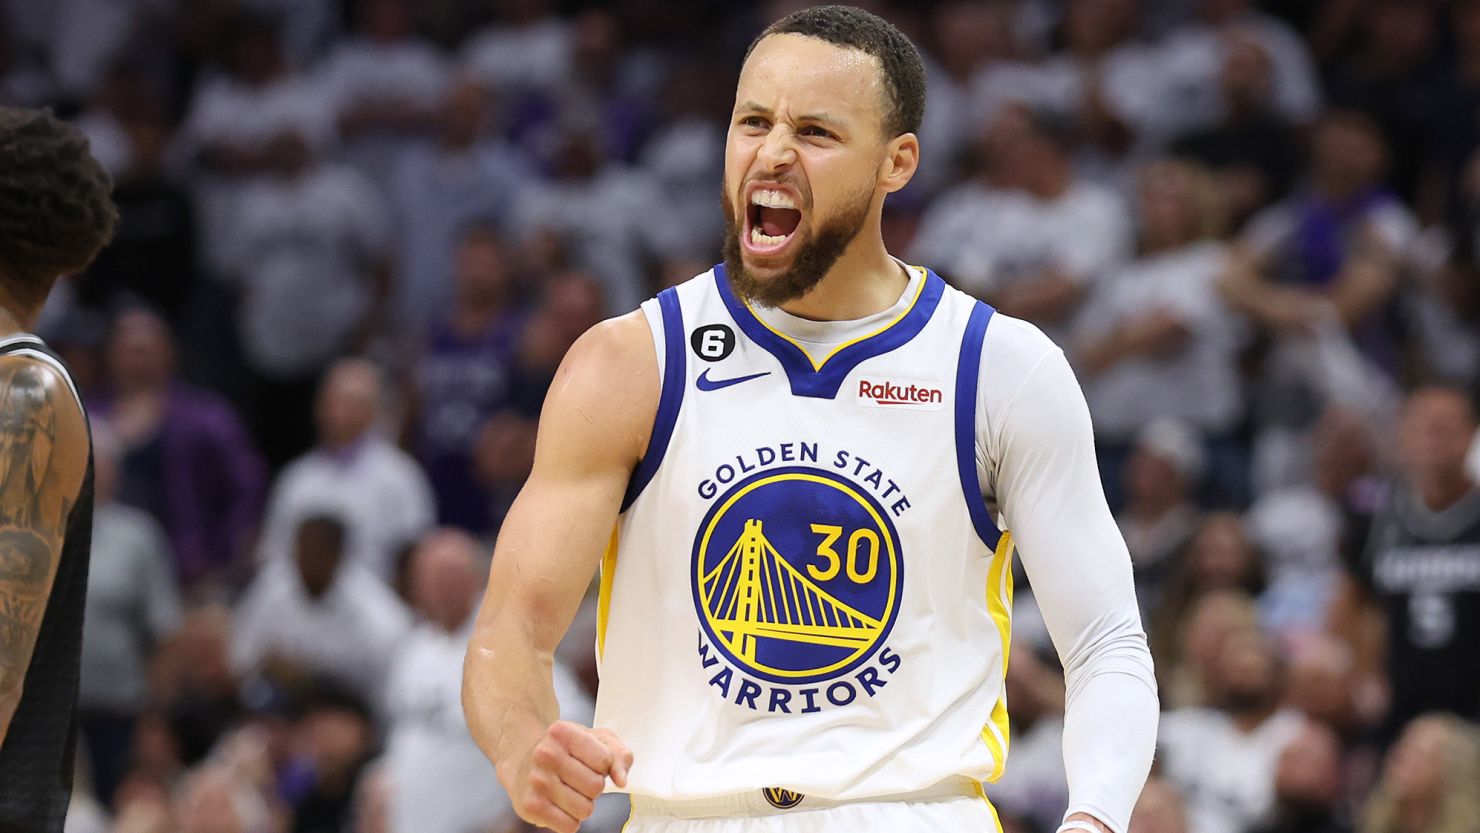 Steph Curry Shines Bright: How the Warriors Kept Their Team Together and Made a Big Statement Against the Pacers